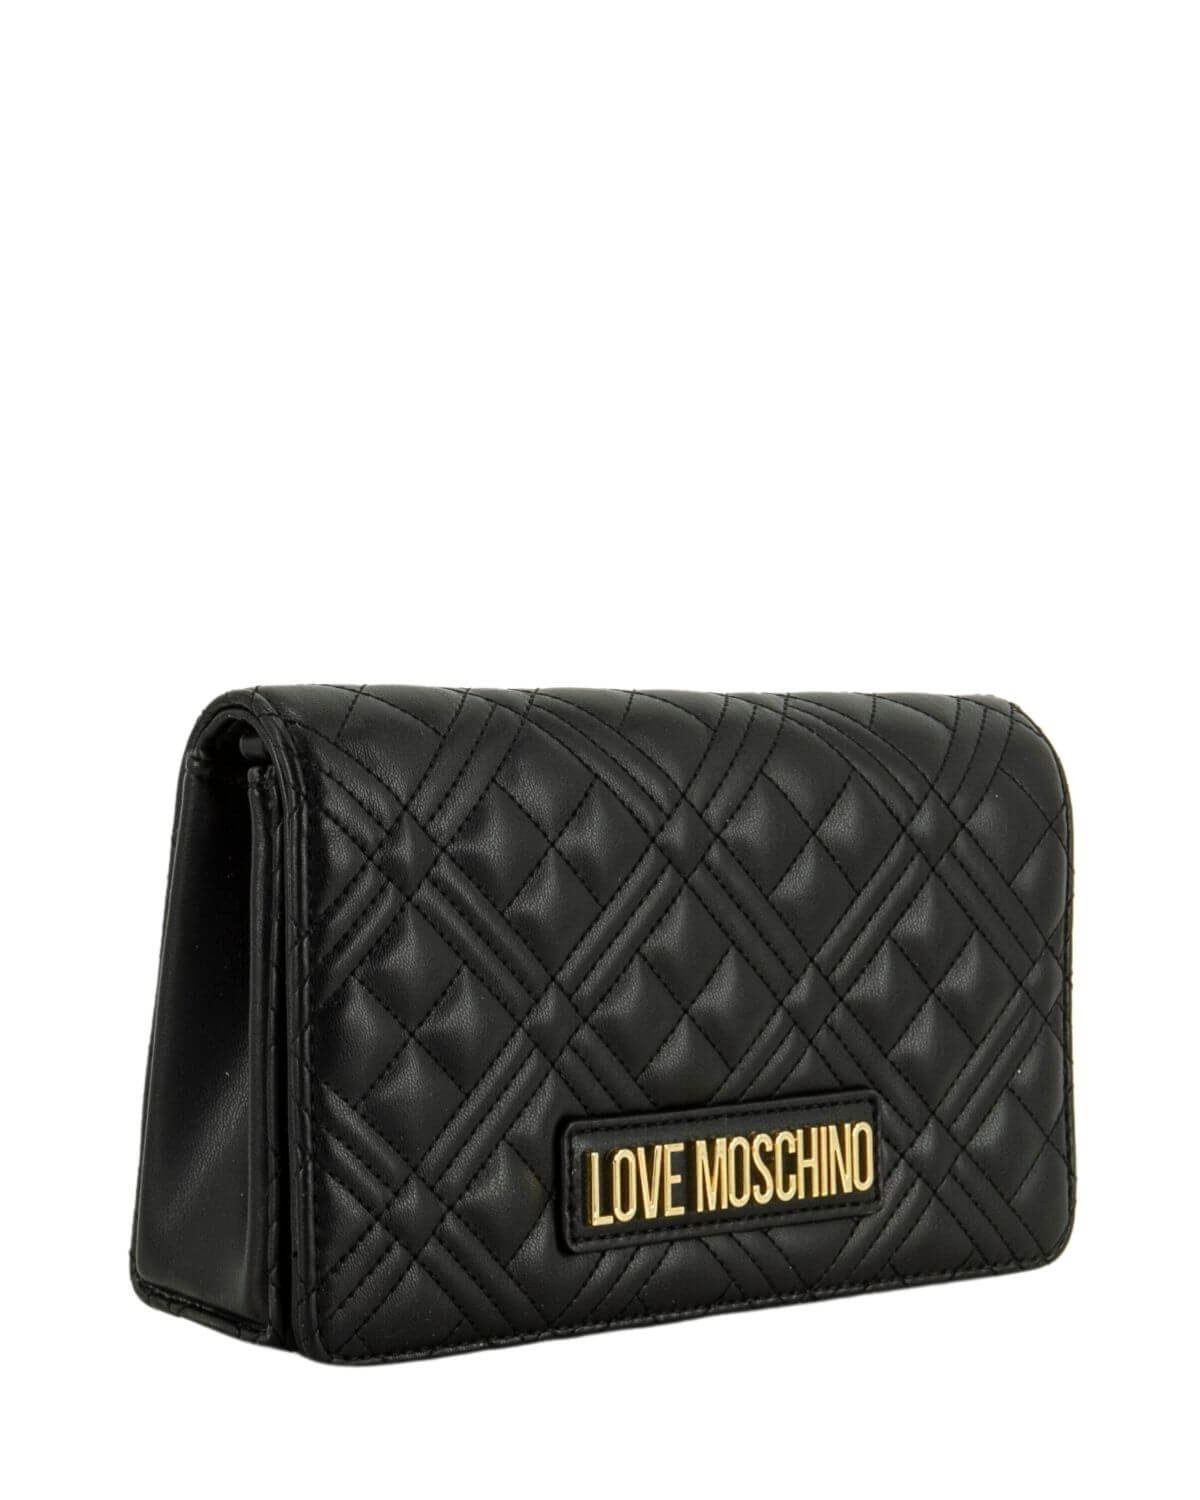 BORSA QUILTED